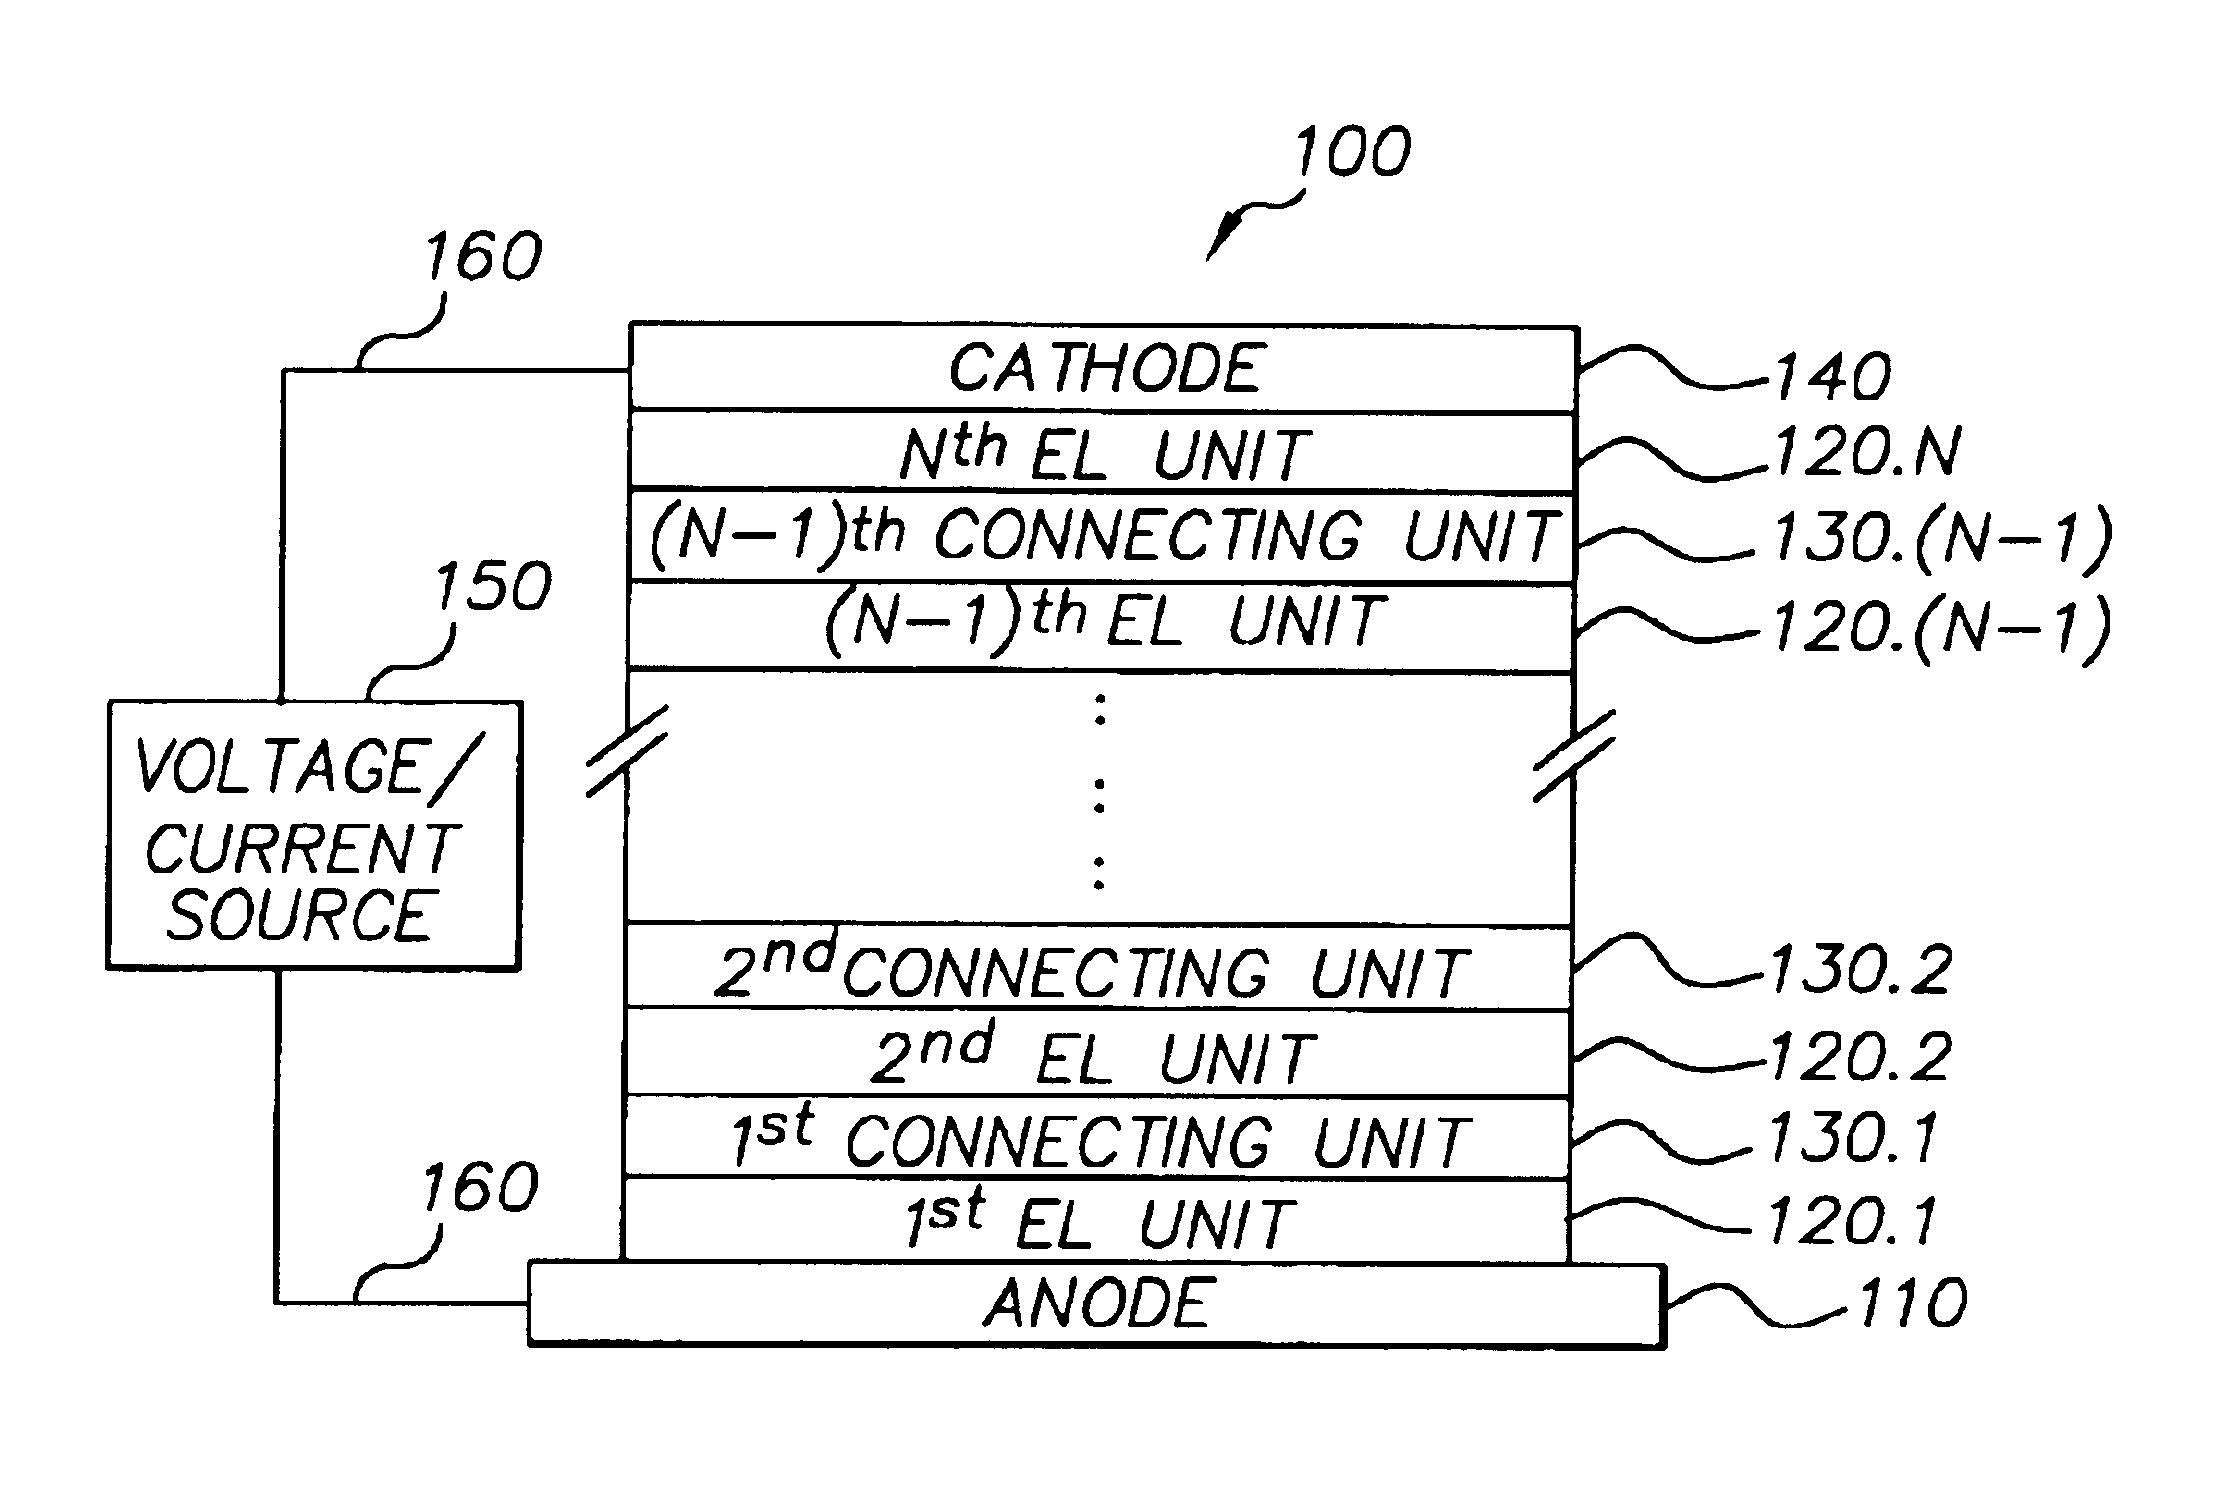 Cascaded organic electroluminescent device having connecting units with N-type and P-type organic layers